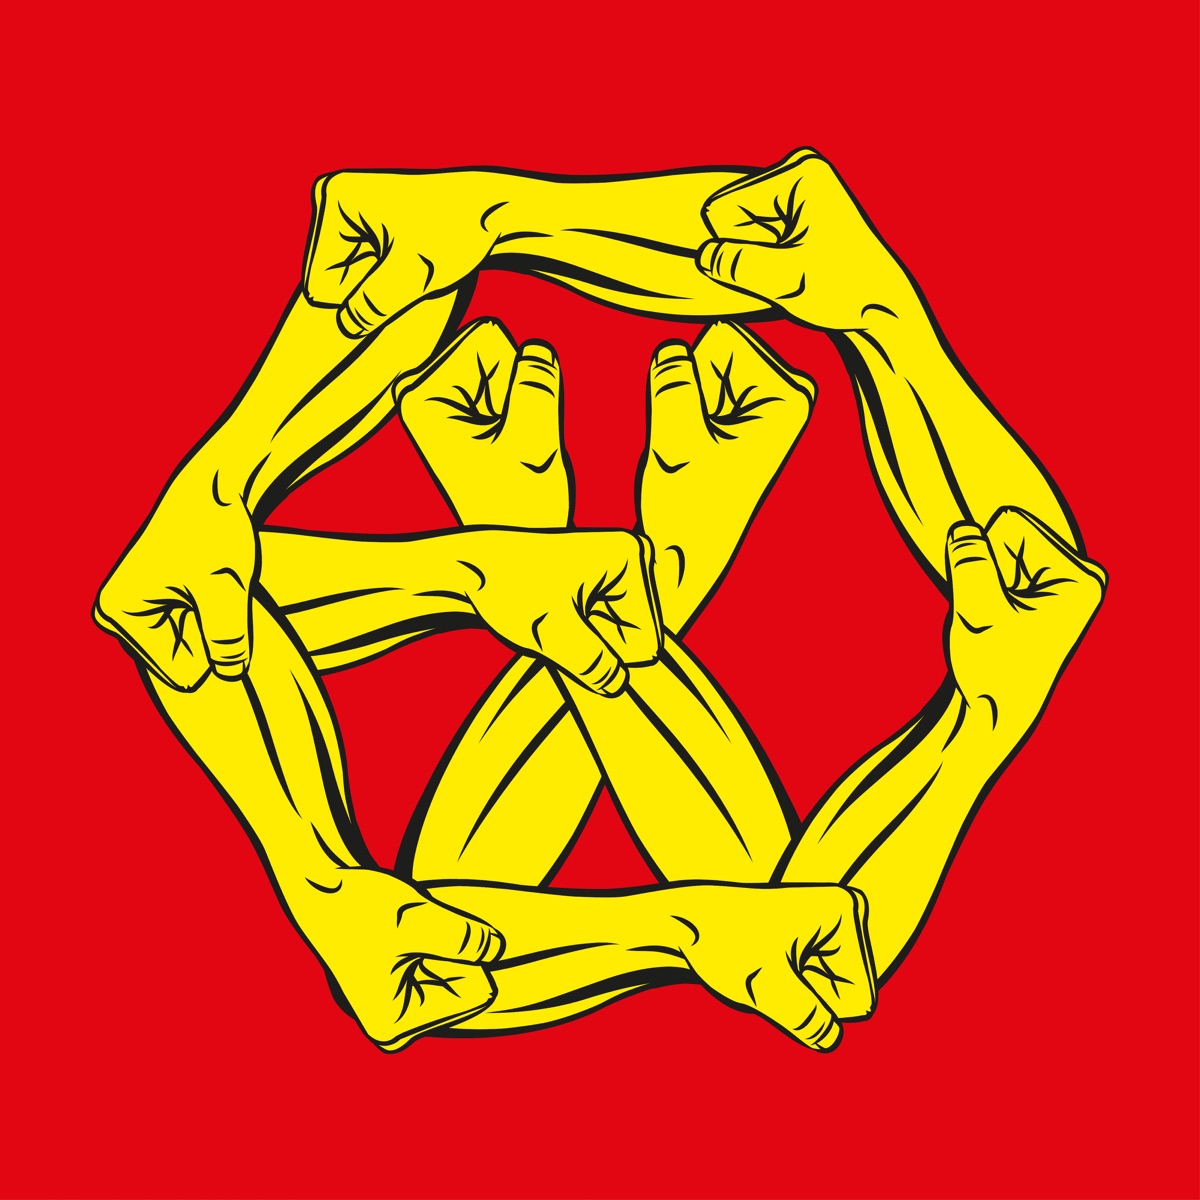 EXO – THE POWER OF MUSIC – The 4th Album ‘THE WAR’ Repackage (Chinese Version) – EP